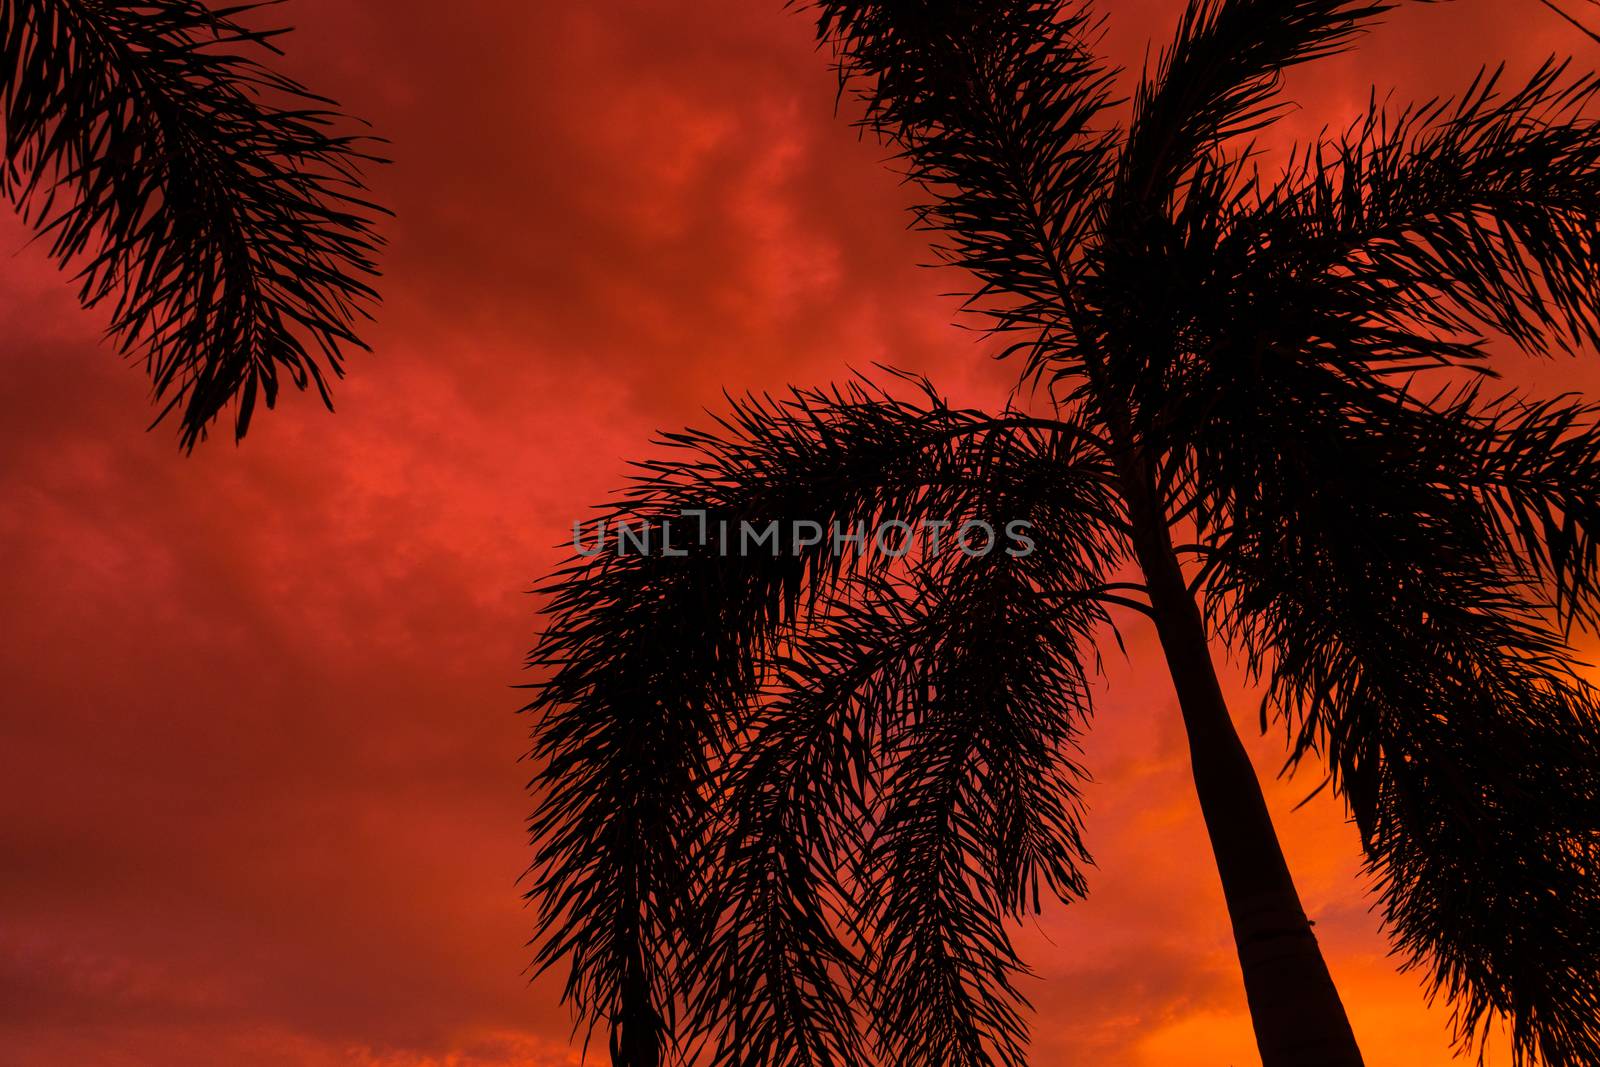 Silhouetted by a palm tree on the background of an unusual fiery red tropical sunset